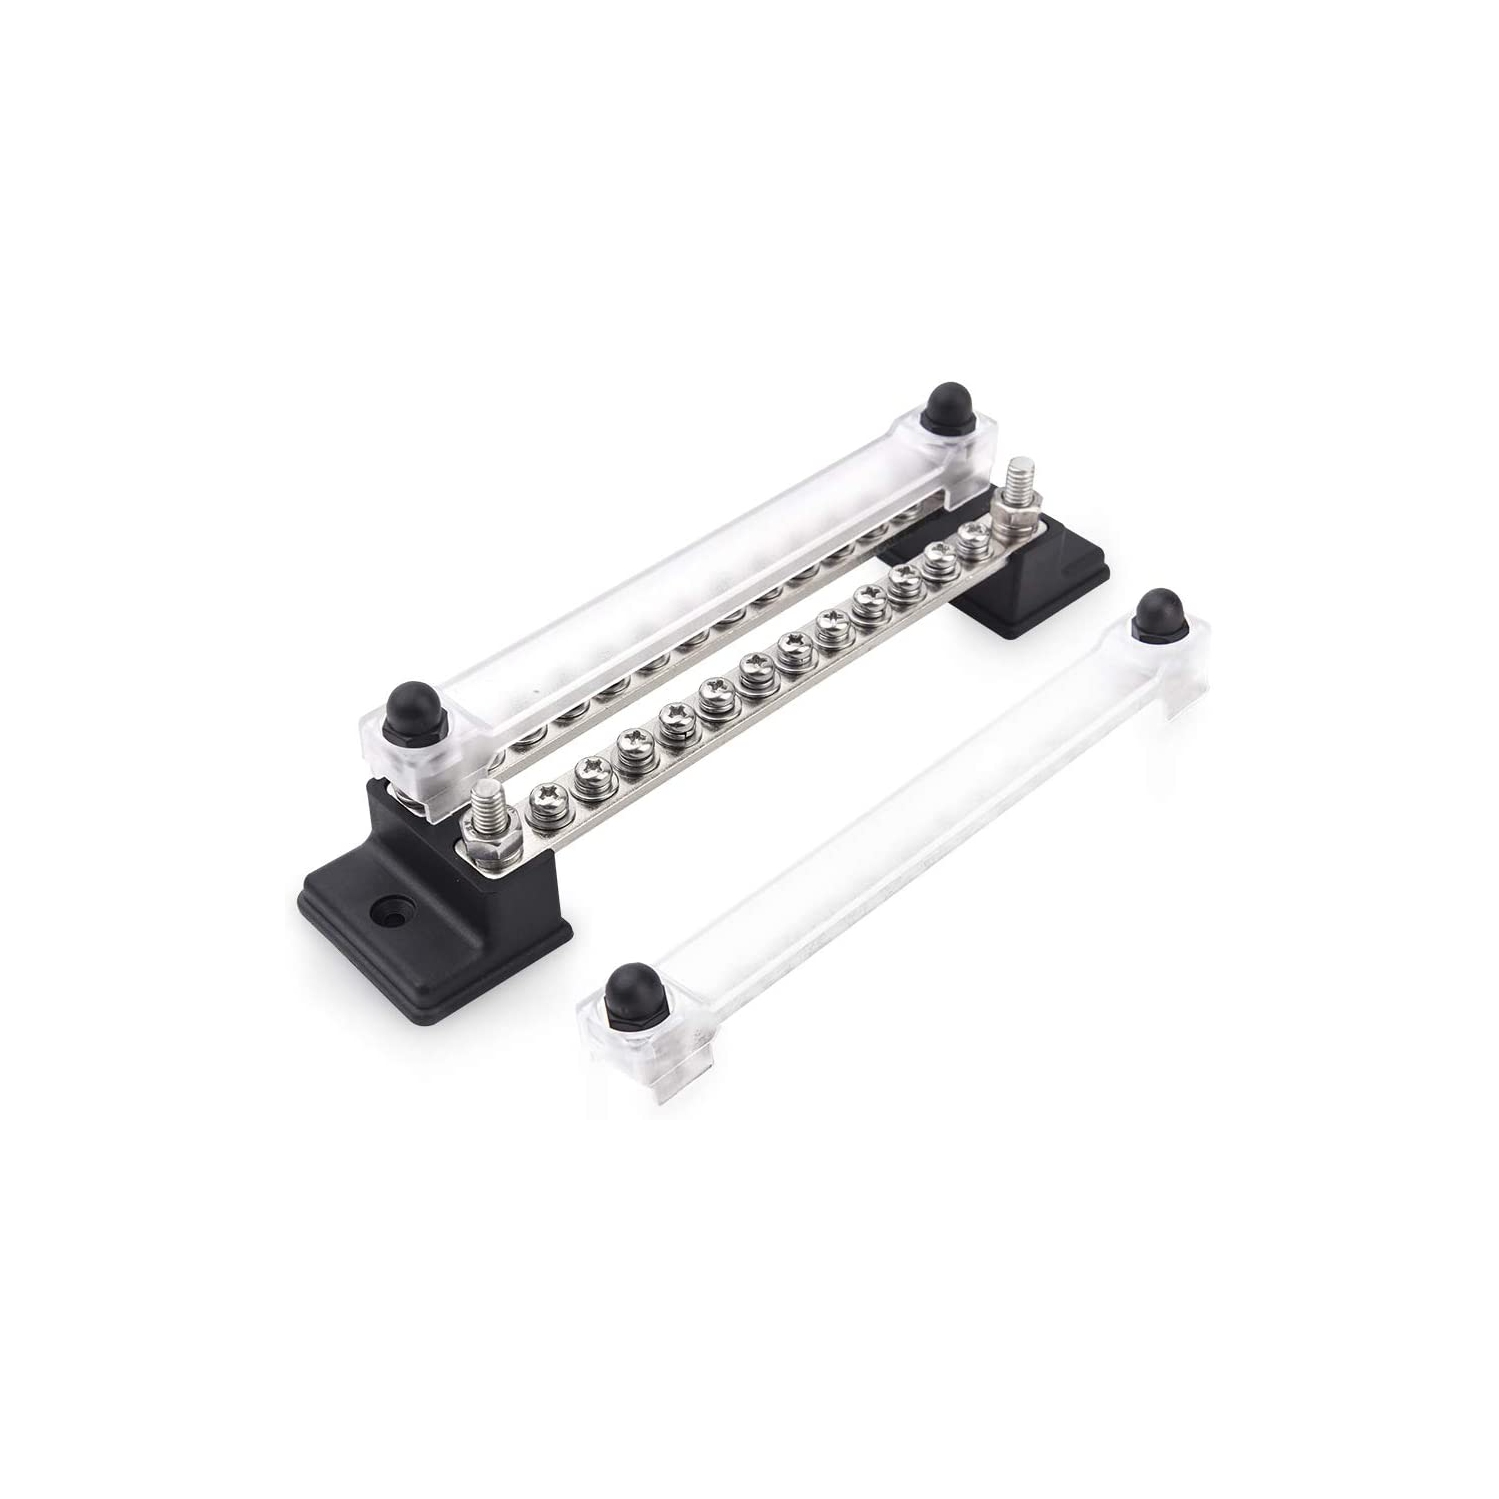 24 Terminal Dual Row 150A Bus Bar and Cover, Ground Distribution Block - Car Boat Marine Power Distribution Terminal Block with 24 Screws and 4 Studs